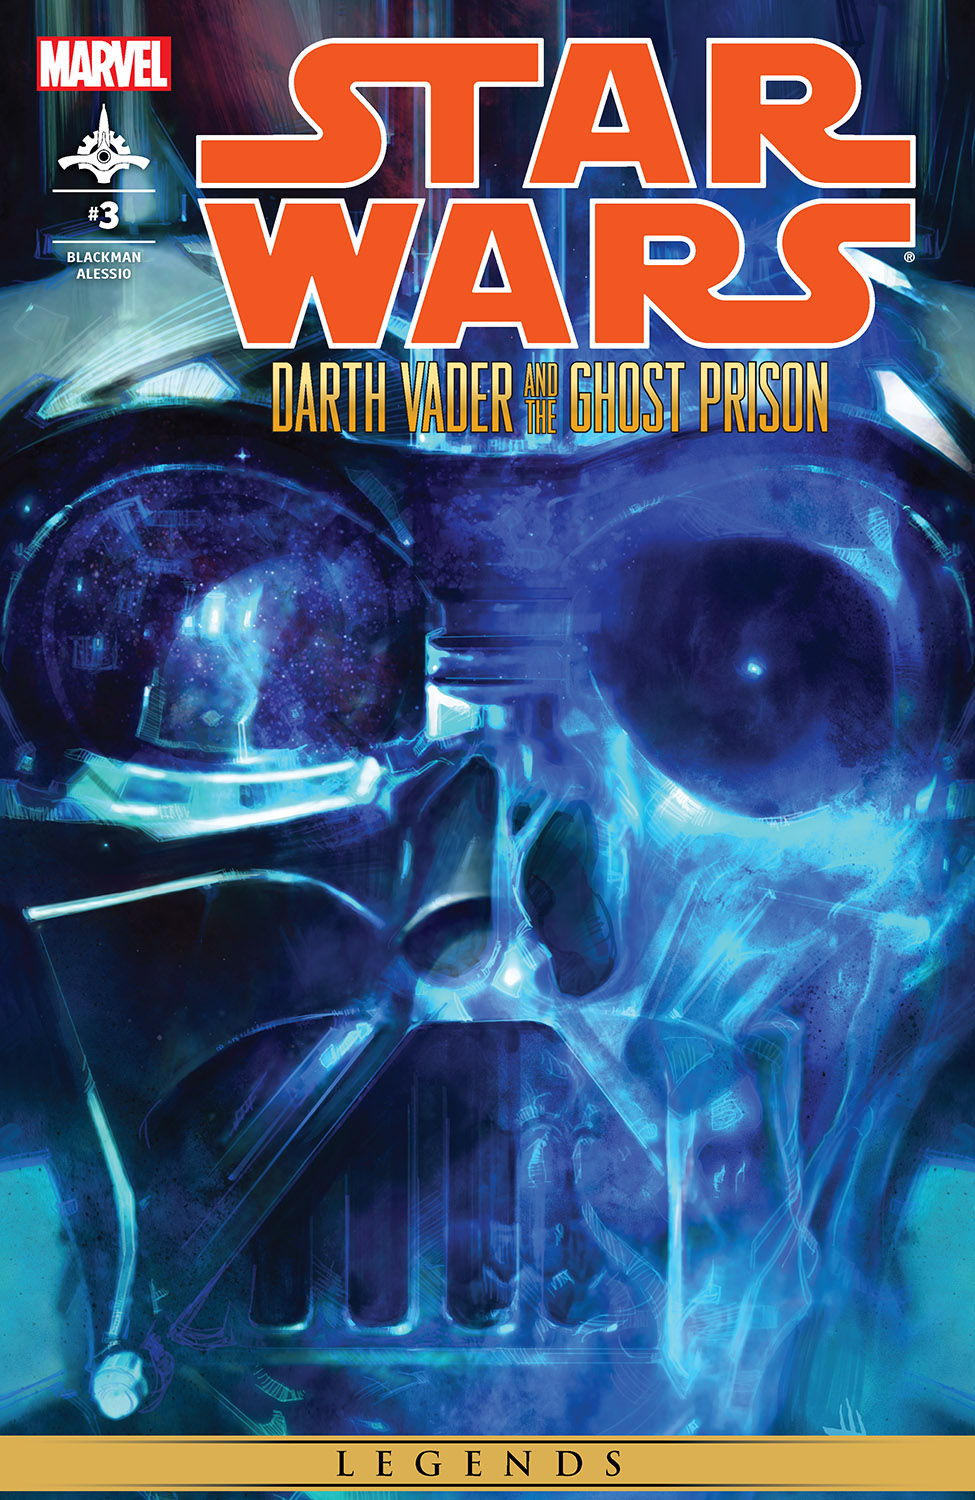 Darth vader and the ghost prison